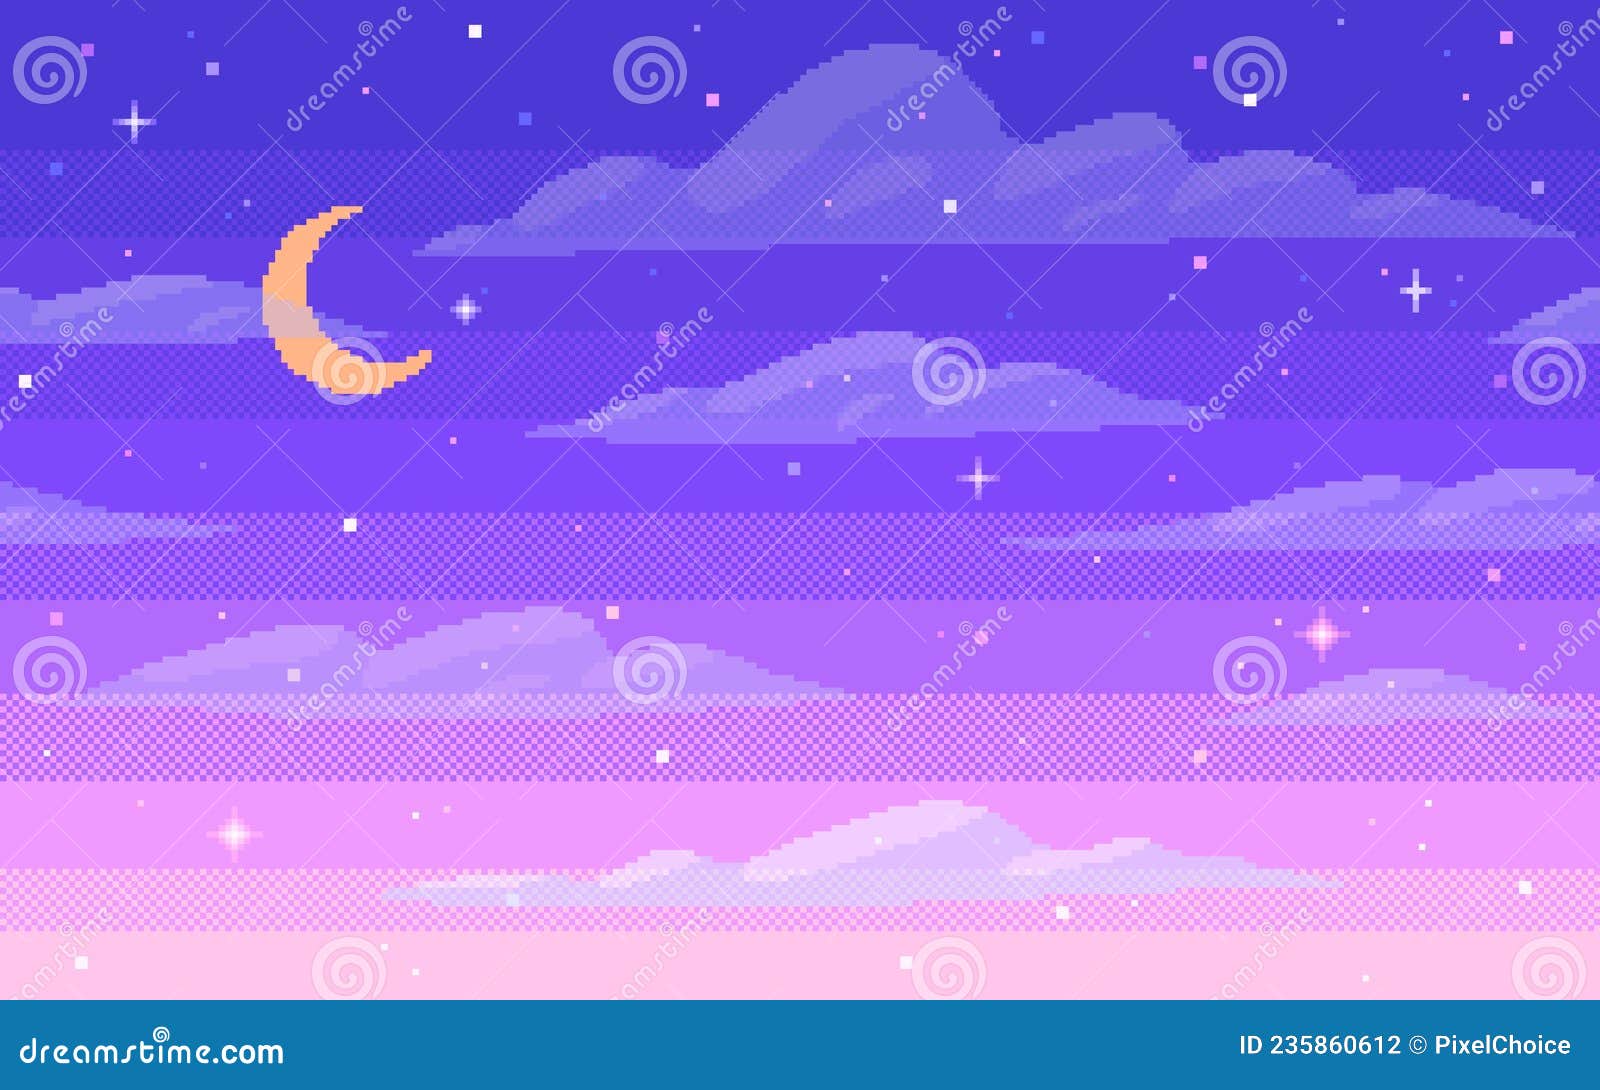 Pixel Art Starry Seamless Background. Night Sky in 8 Bit Style Stock Vector  - Illustration of interface, space: 235860612